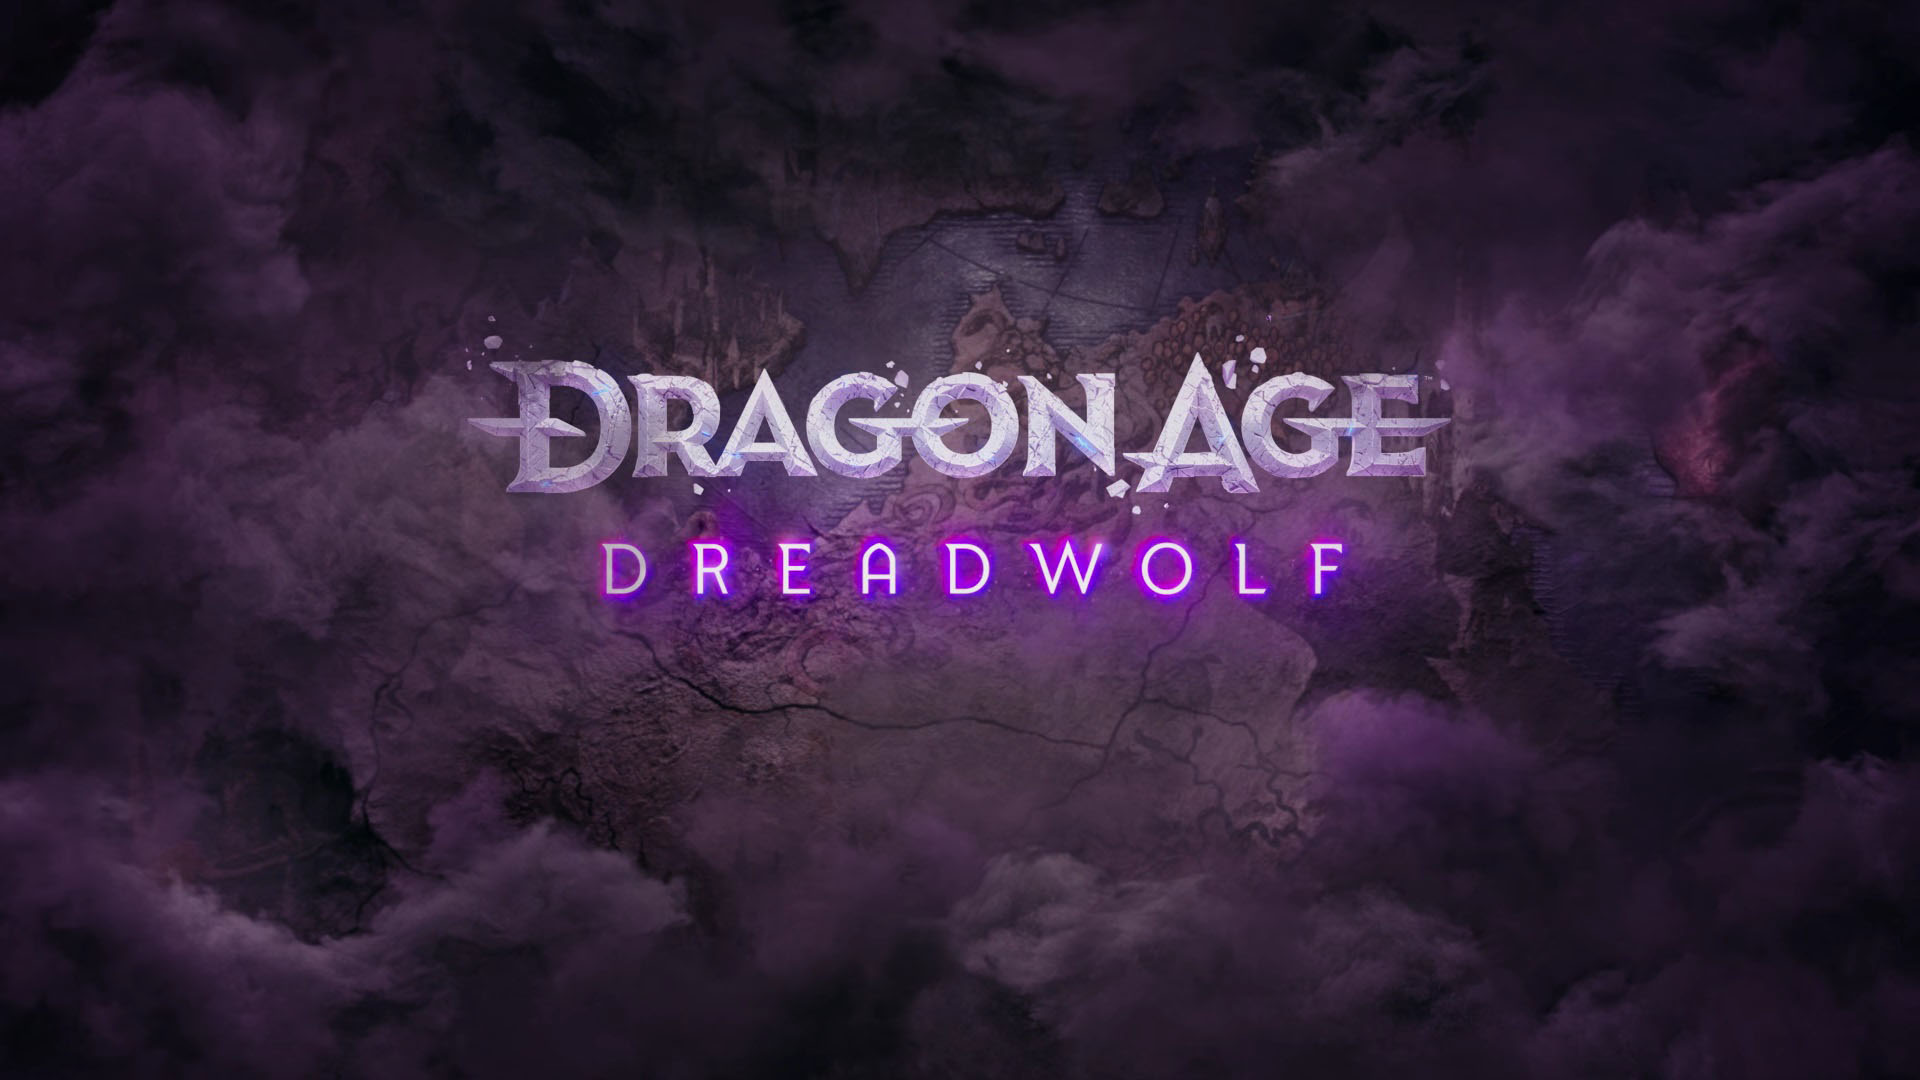 Dragon Age Dreadwolf Full Reveal Summer - Steam Page Opens - Reveal Soon